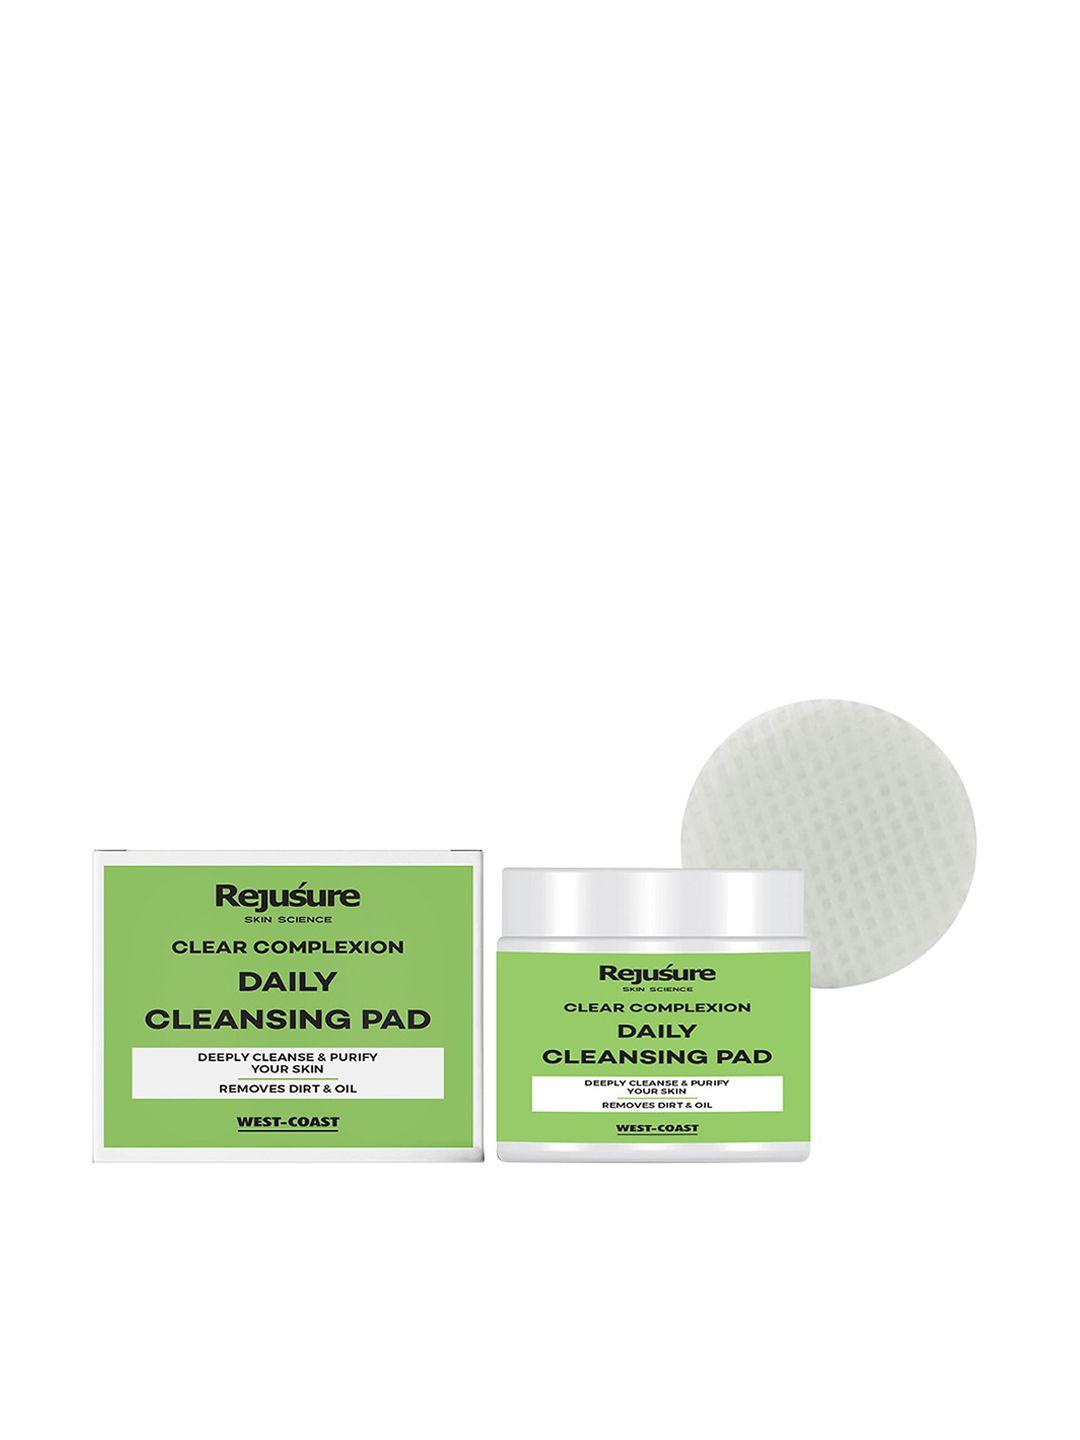 rejusure-clear-complexion-daily-cleansing-pads-to-remove-dirt-&-oil---50-pads